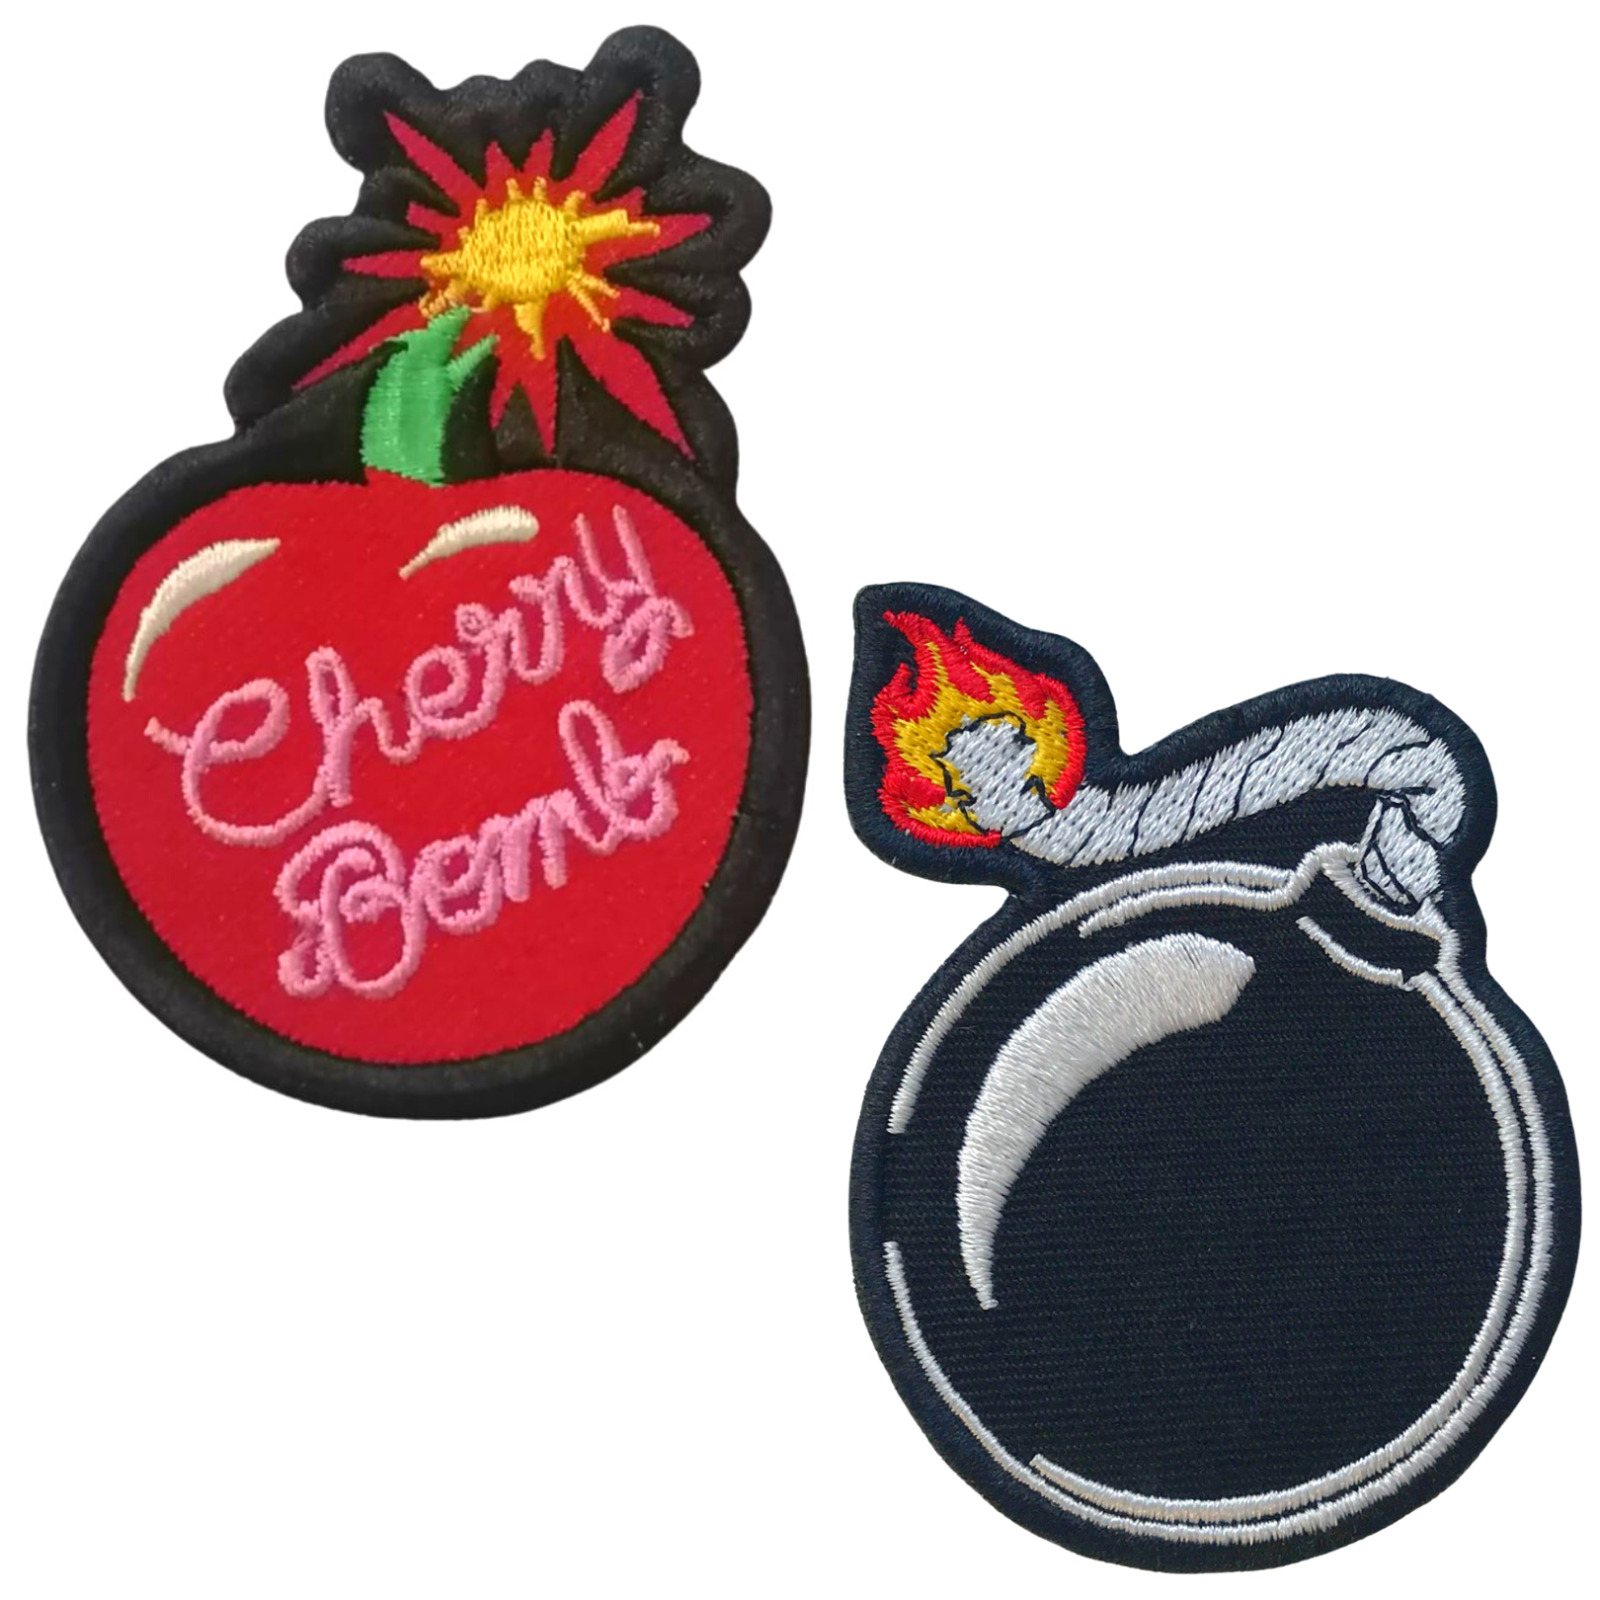 Cute Cherry Bomb Art Pair Comic Jeans Jacket Badge Iron/Sew on Embroidered patch